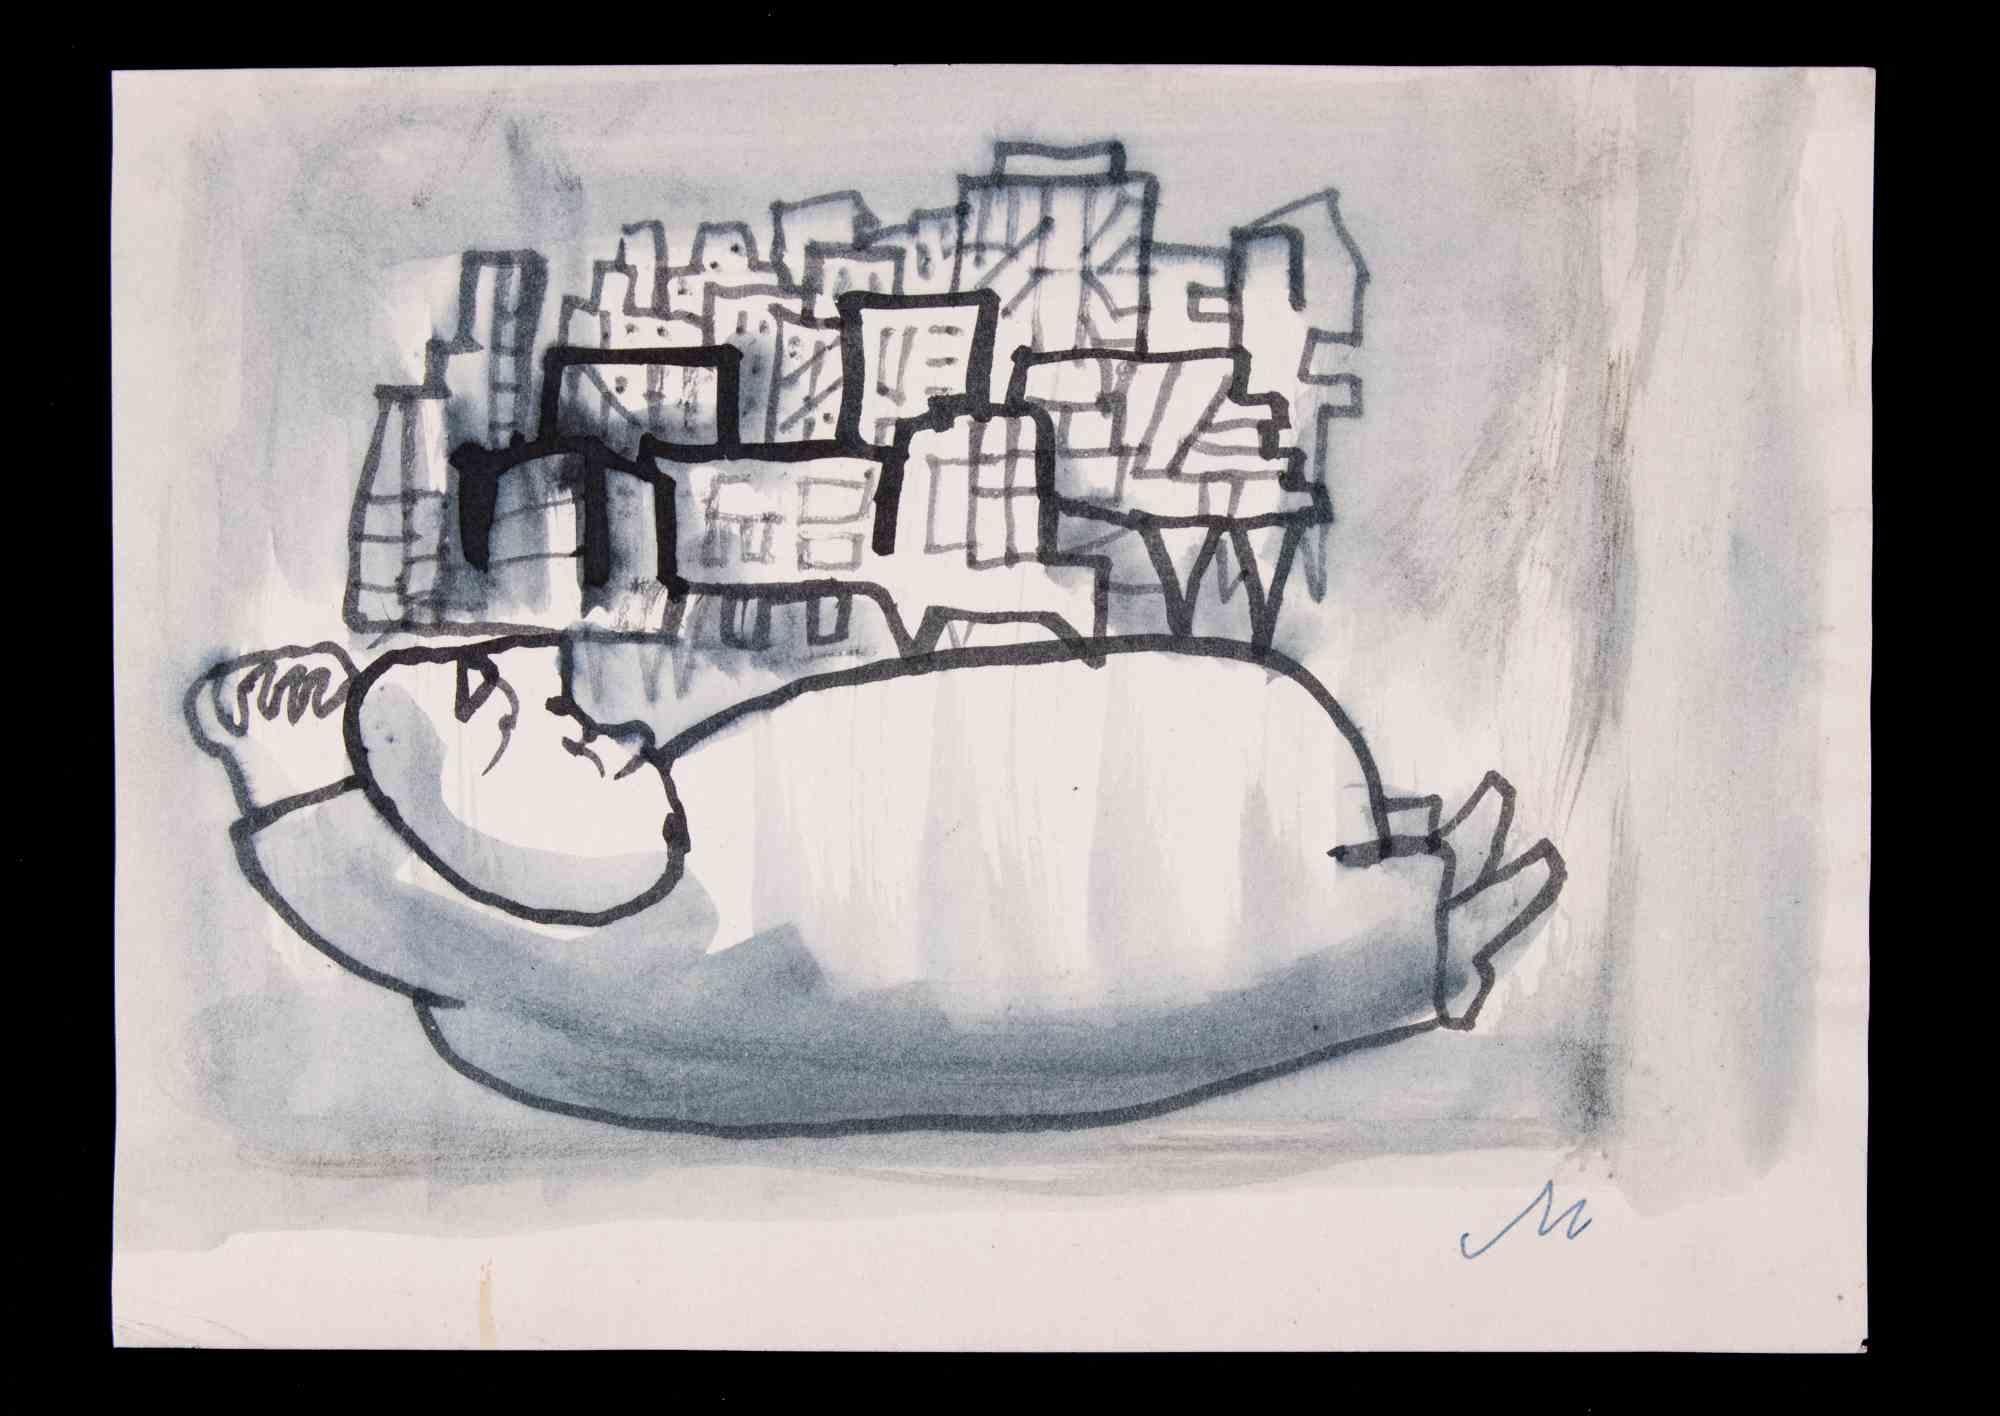 Builder  is a Watercolor Drawing realized by Mino Maccari  (1924-1989) in 1960s.

Monogrammed on the lower margin.

Good condition on a little paper.

Mino Maccari (Siena, 1924-Rome, June 16, 1989) was an Italian writer, painter, engraver and